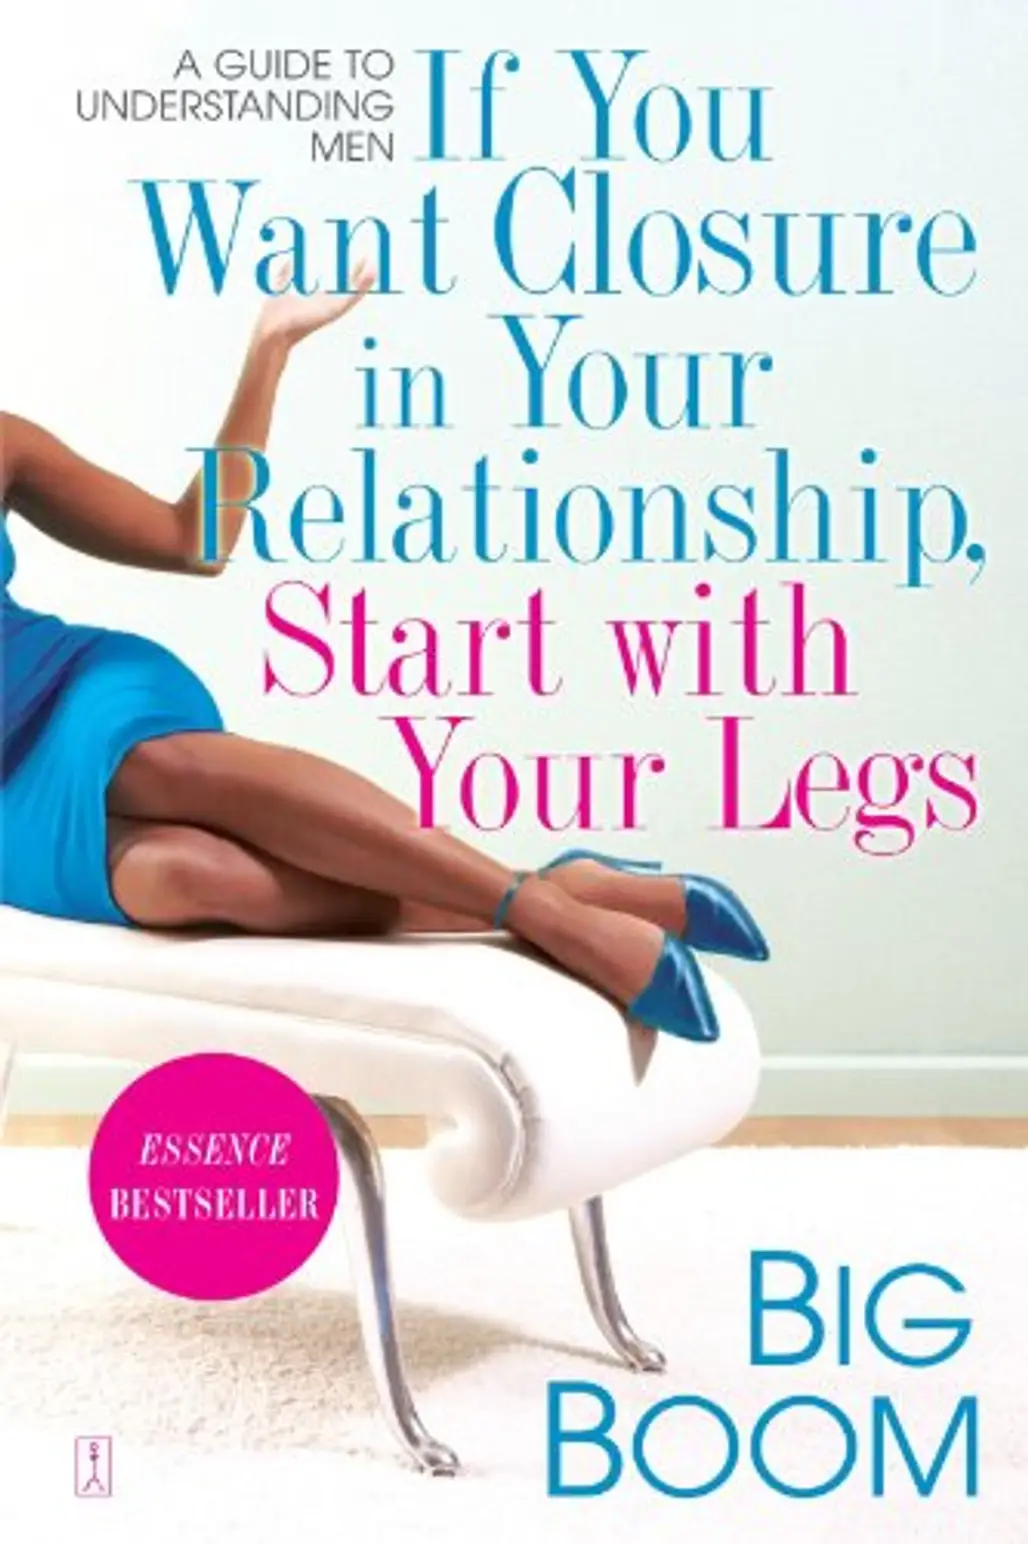 If You Want Closure in Your Relationships, Start with Your Legs: a Guide to Understanding Men by Big Boom